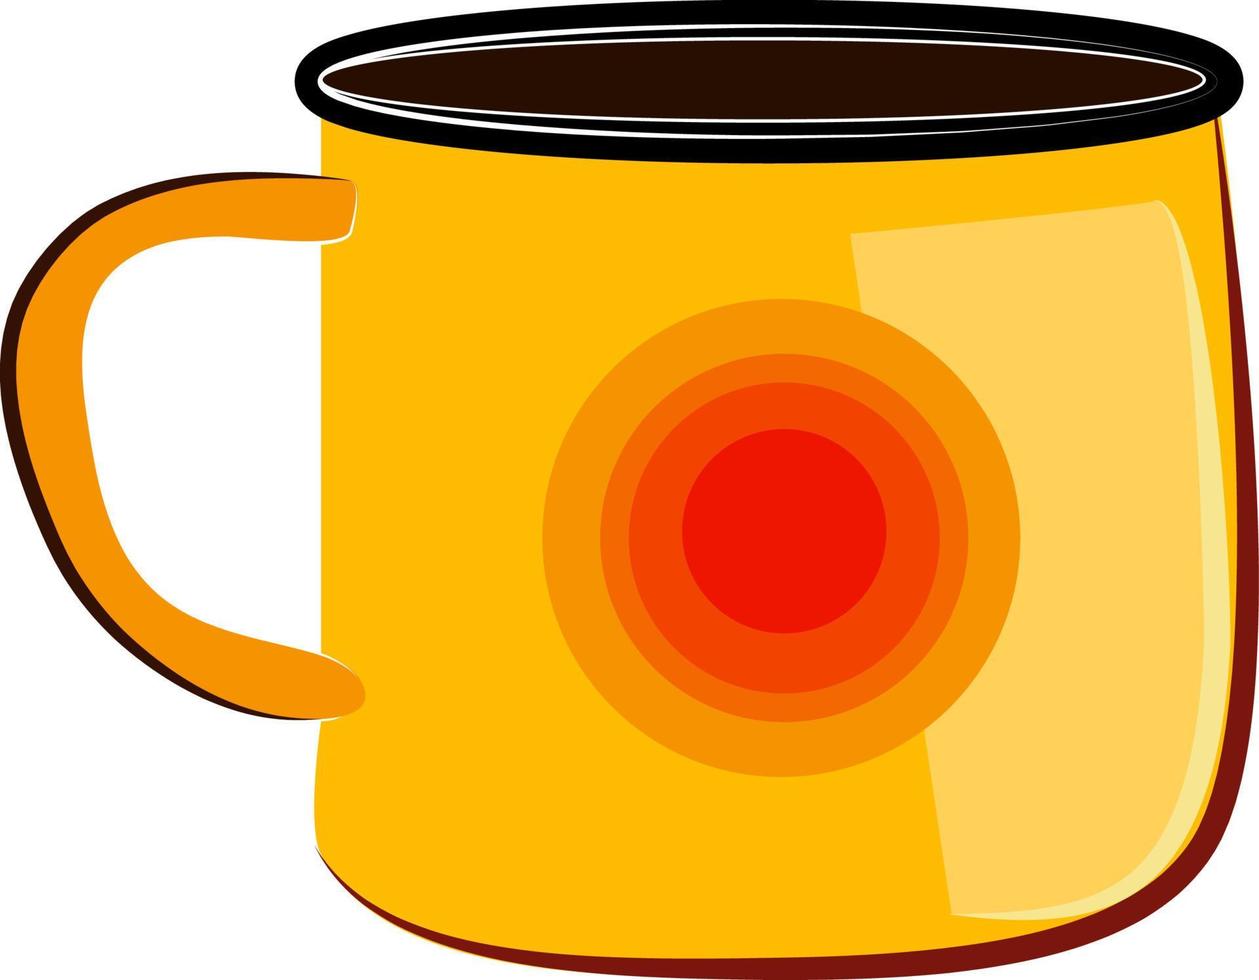 Yellow cup, illustration, vector on white background.